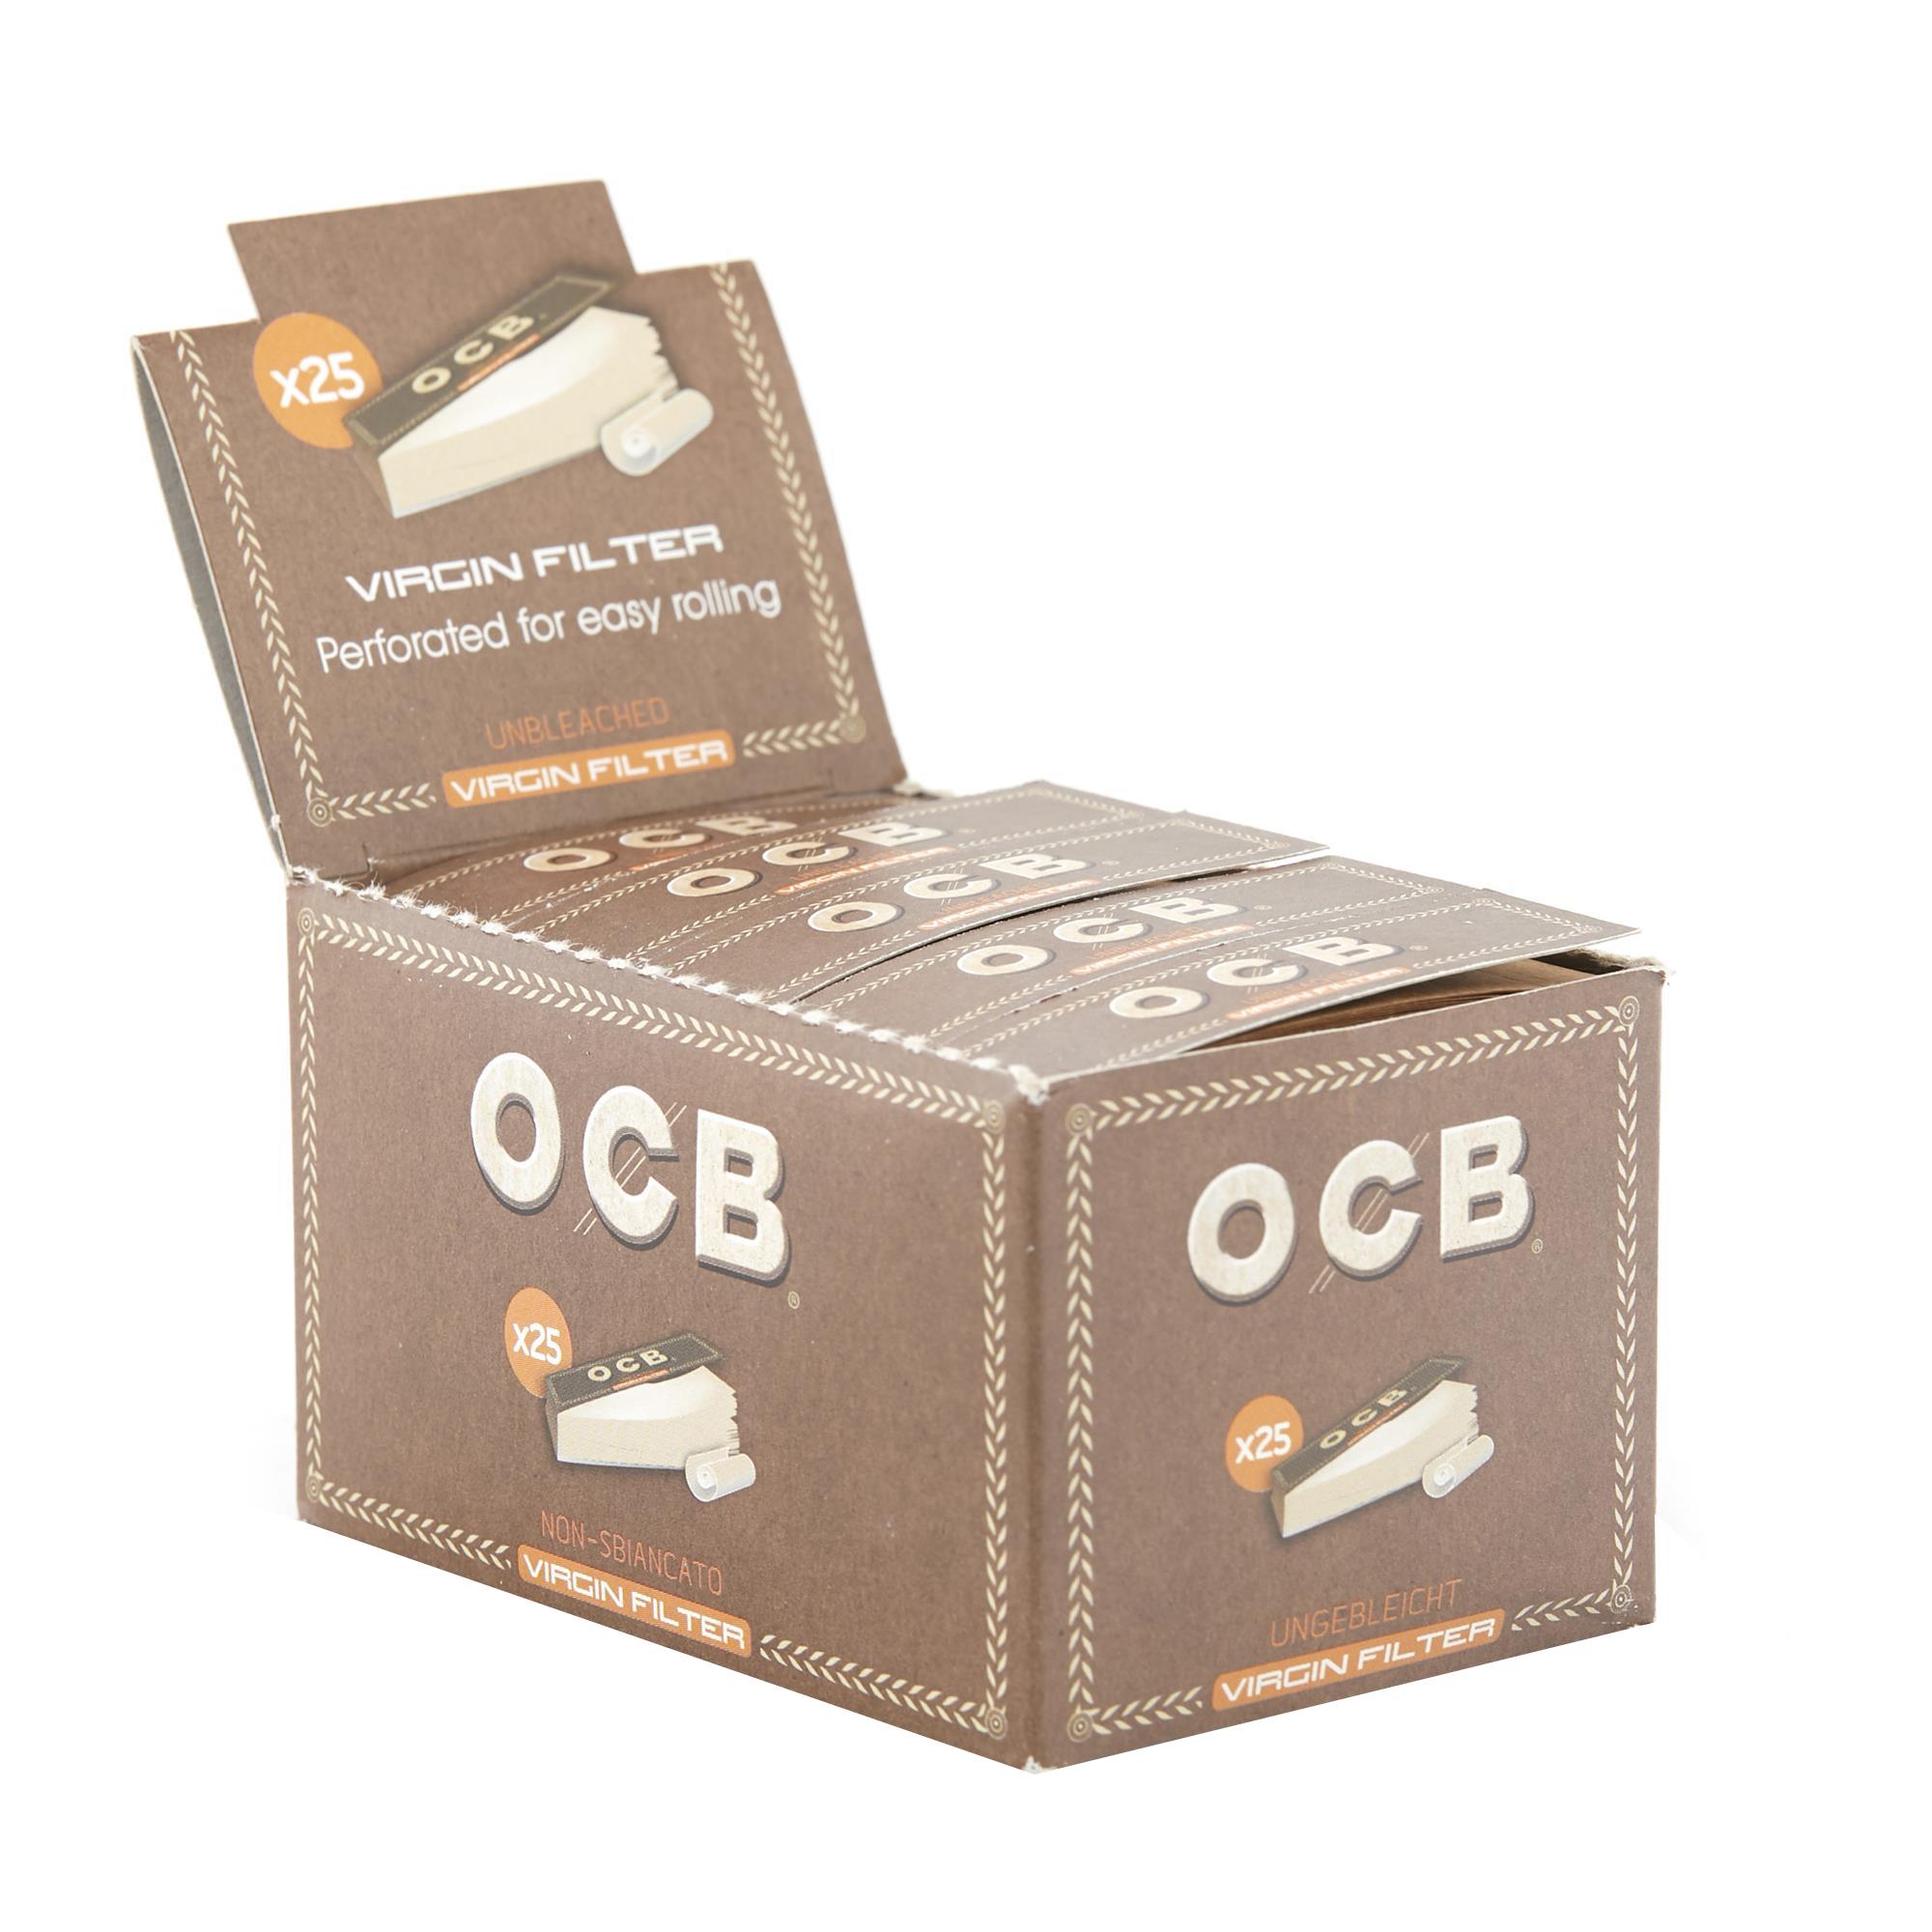 OCB VIRGIN UNBLEACHED PERFORATED TIPS